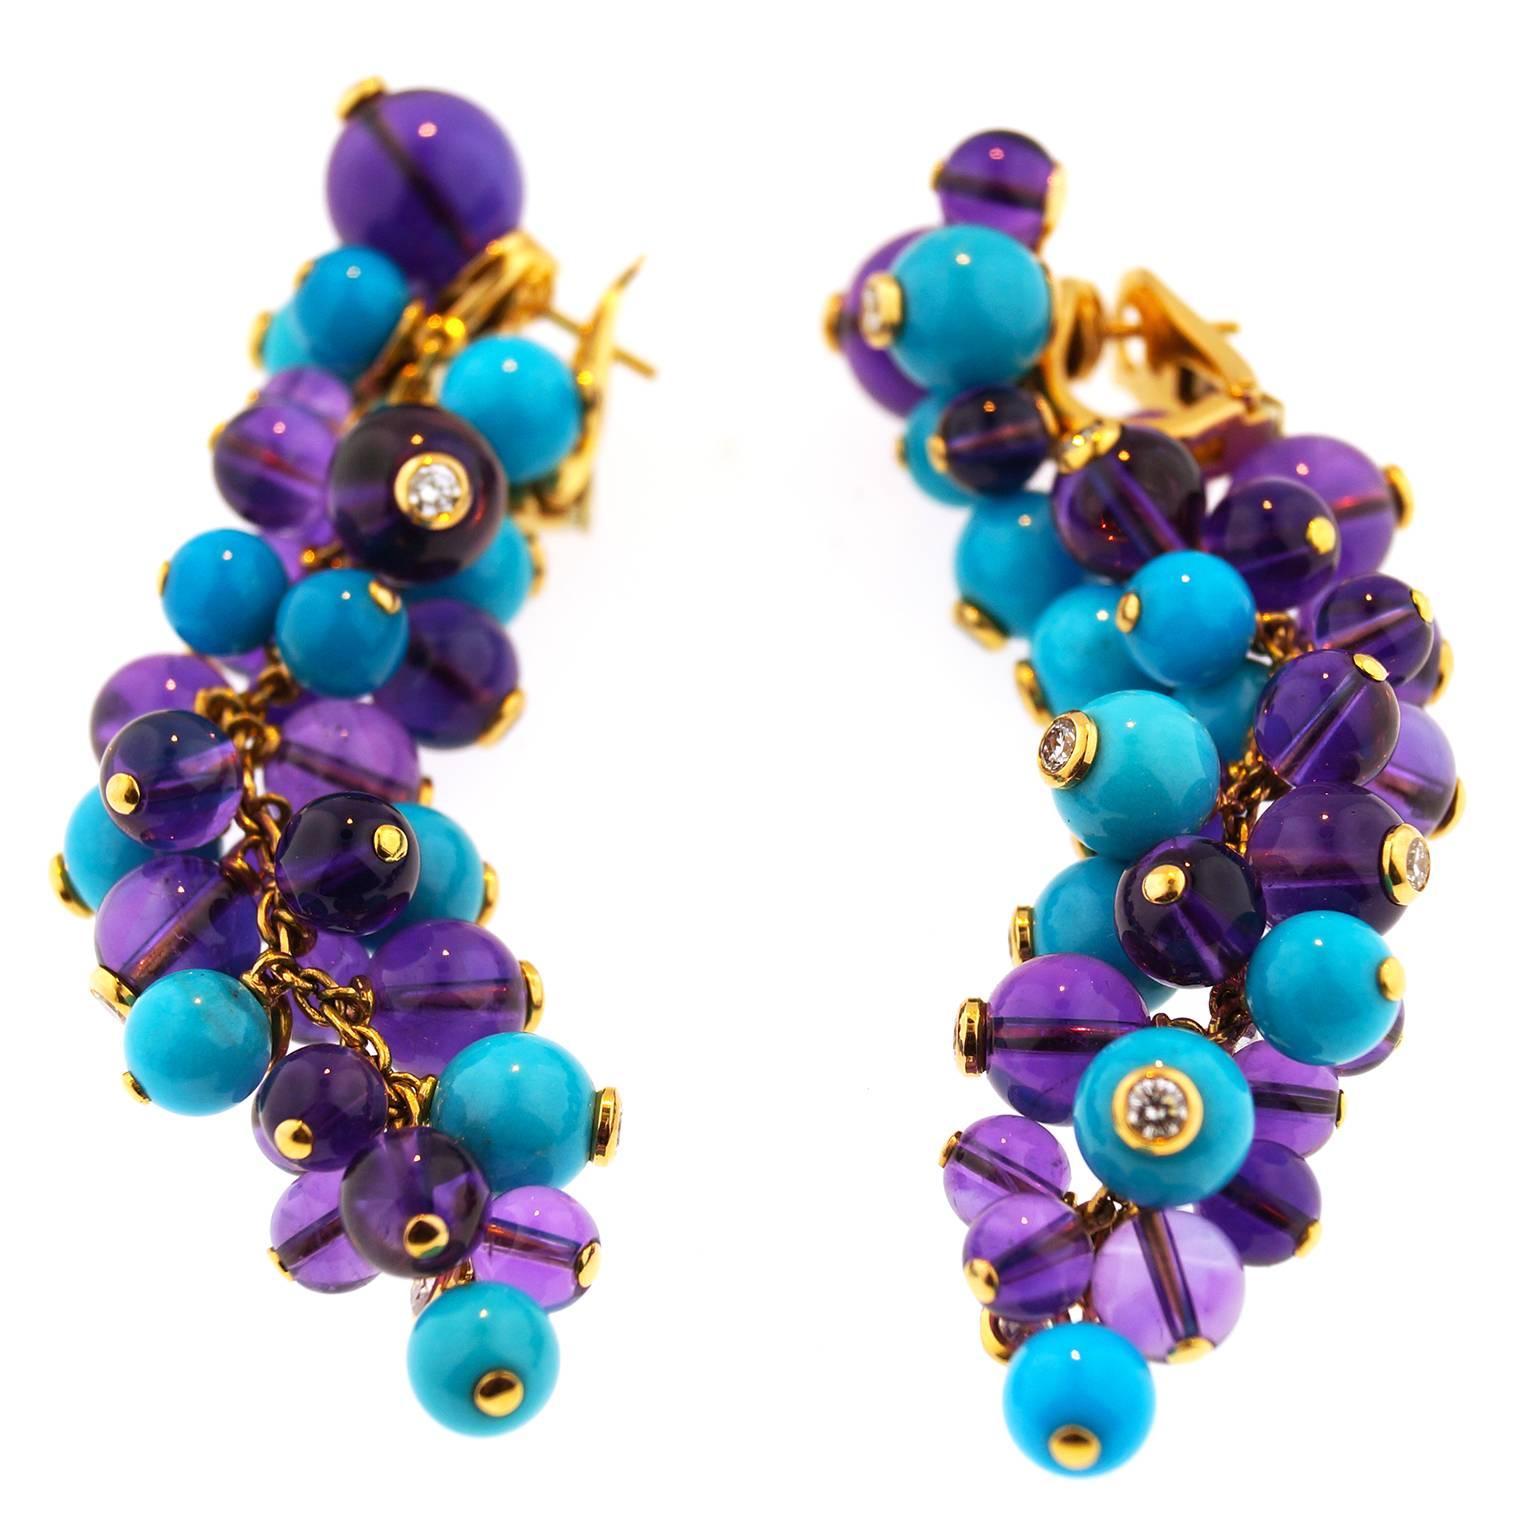 These dangling earrings from Cartier's Les Delices de Goa collection is made in 18k yellow gold and features a cluster of 11 Turquoise beads and 20 Lapis Lazuli beads accented with 12 solitaire diamonds. 
This fantastic  rare pair of earrings  is